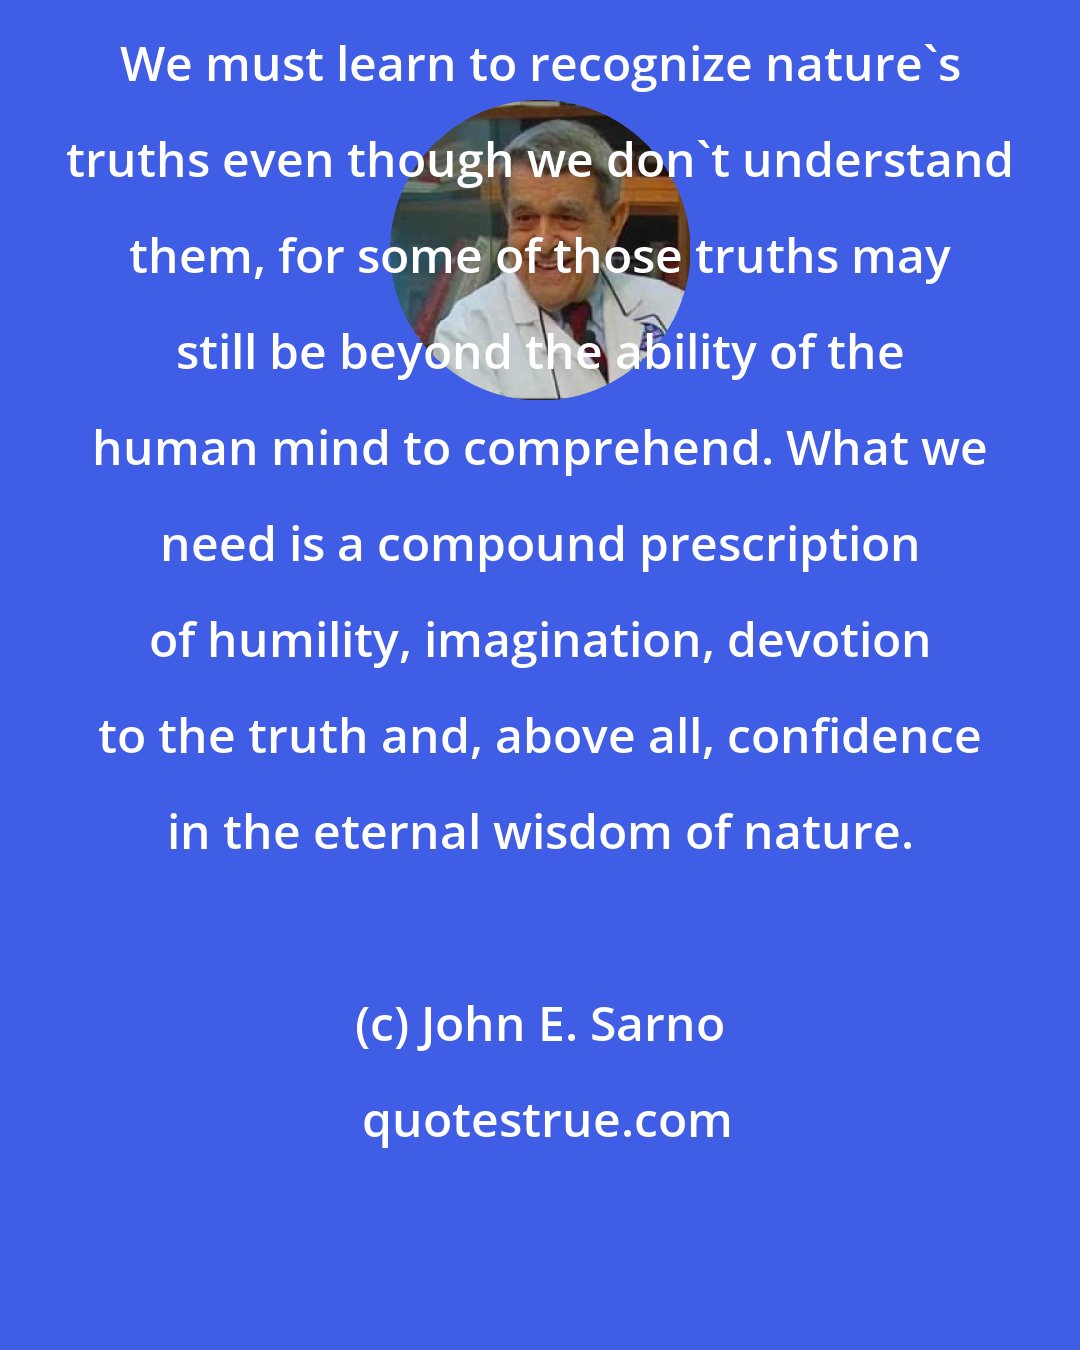 John E. Sarno: We must learn to recognize nature's truths even though we don't understand them, for some of those truths may still be beyond the ability of the human mind to comprehend. What we need is a compound prescription of humility, imagination, devotion to the truth and, above all, confidence in the eternal wisdom of nature.